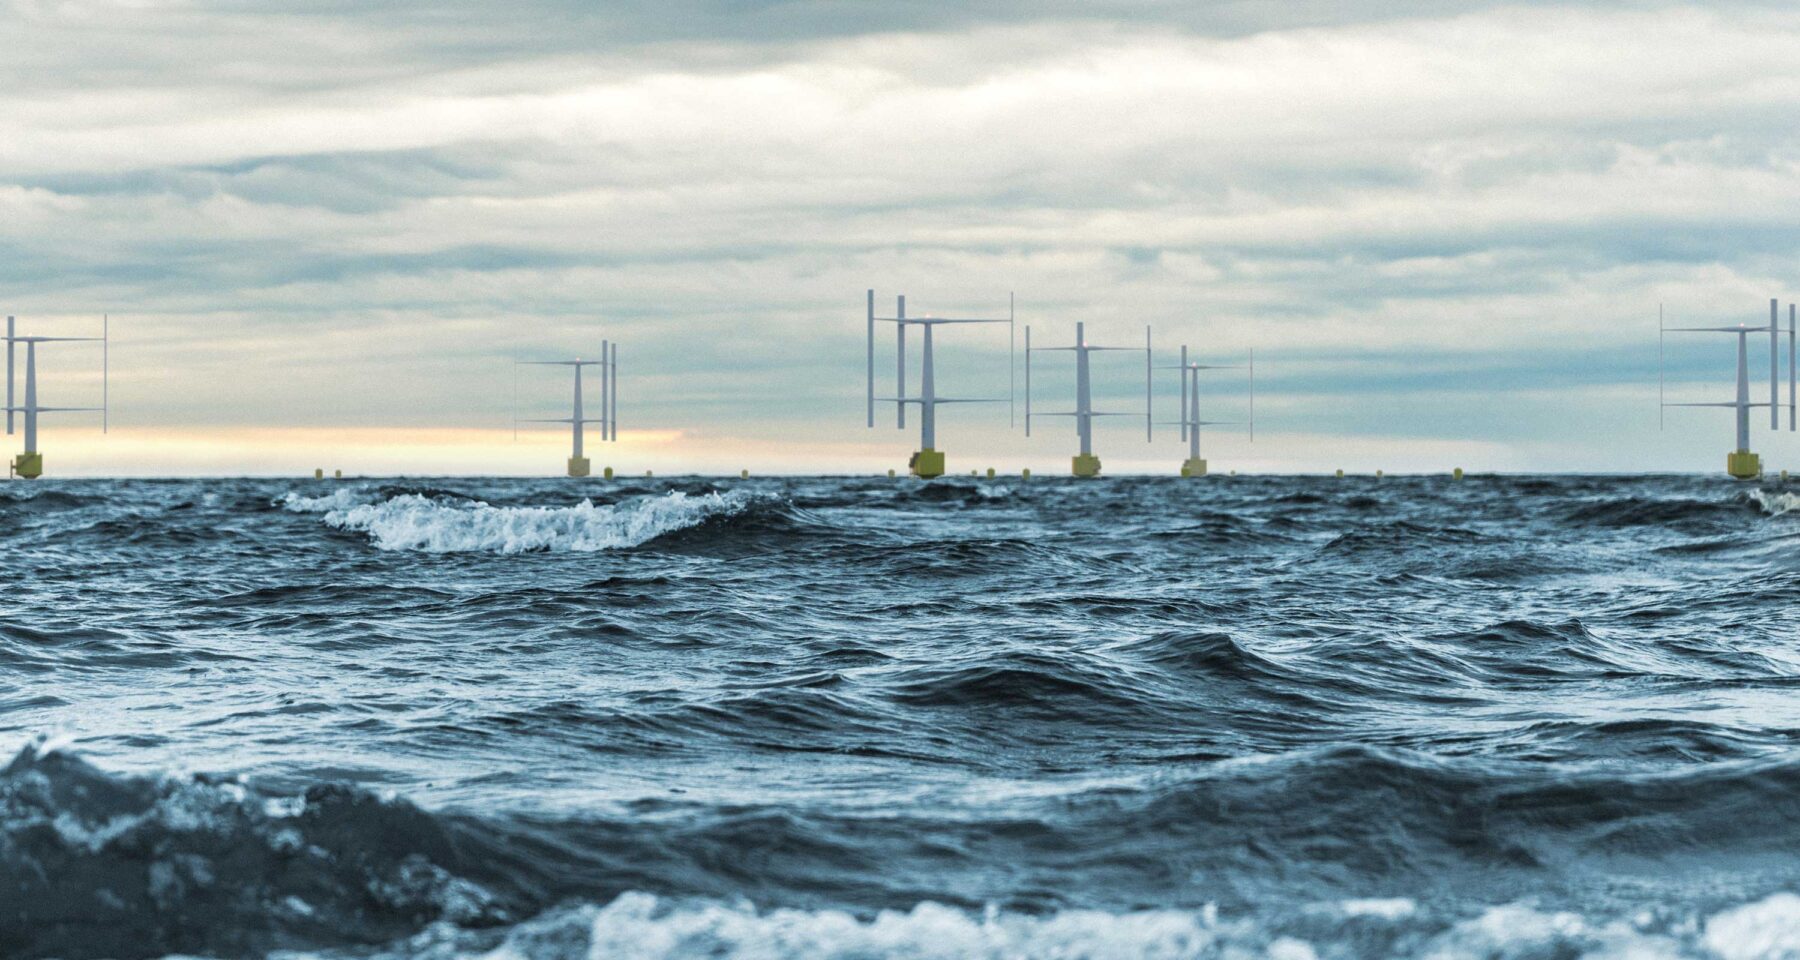 Swedish energy-tech company SeaTwirl and UK-based energy management and energy storage firm Verlume have inked a memorandum of understanding (MoU) to collaborate on the electrification of offshore assets and decarbonization of the oil and gas industry